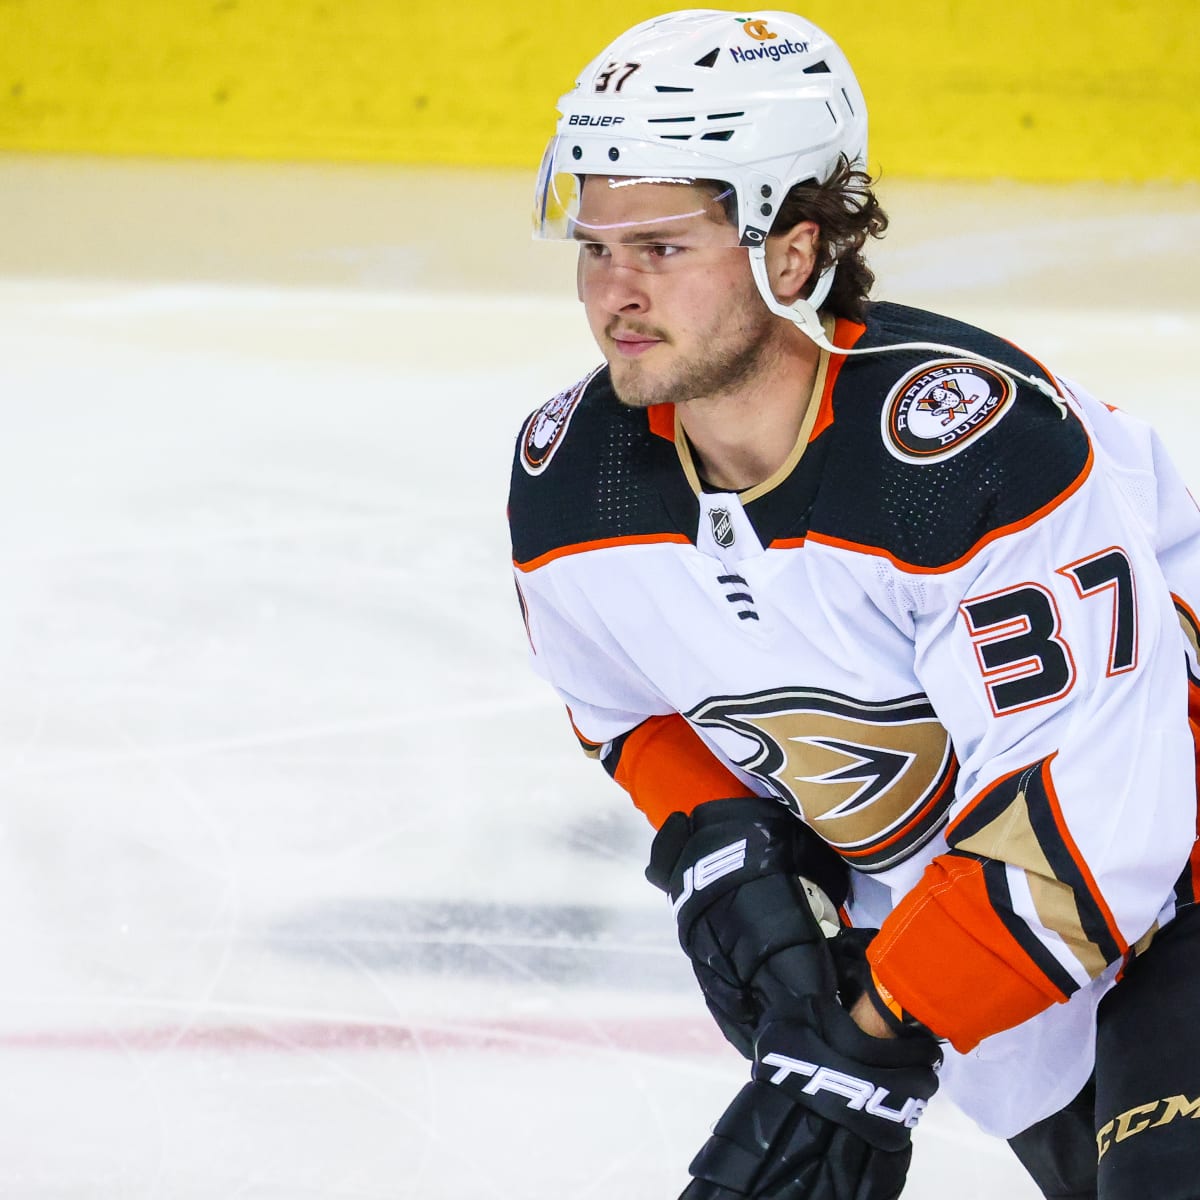 Report: Anaheim Ducks to become Mighty once more as part of 20th